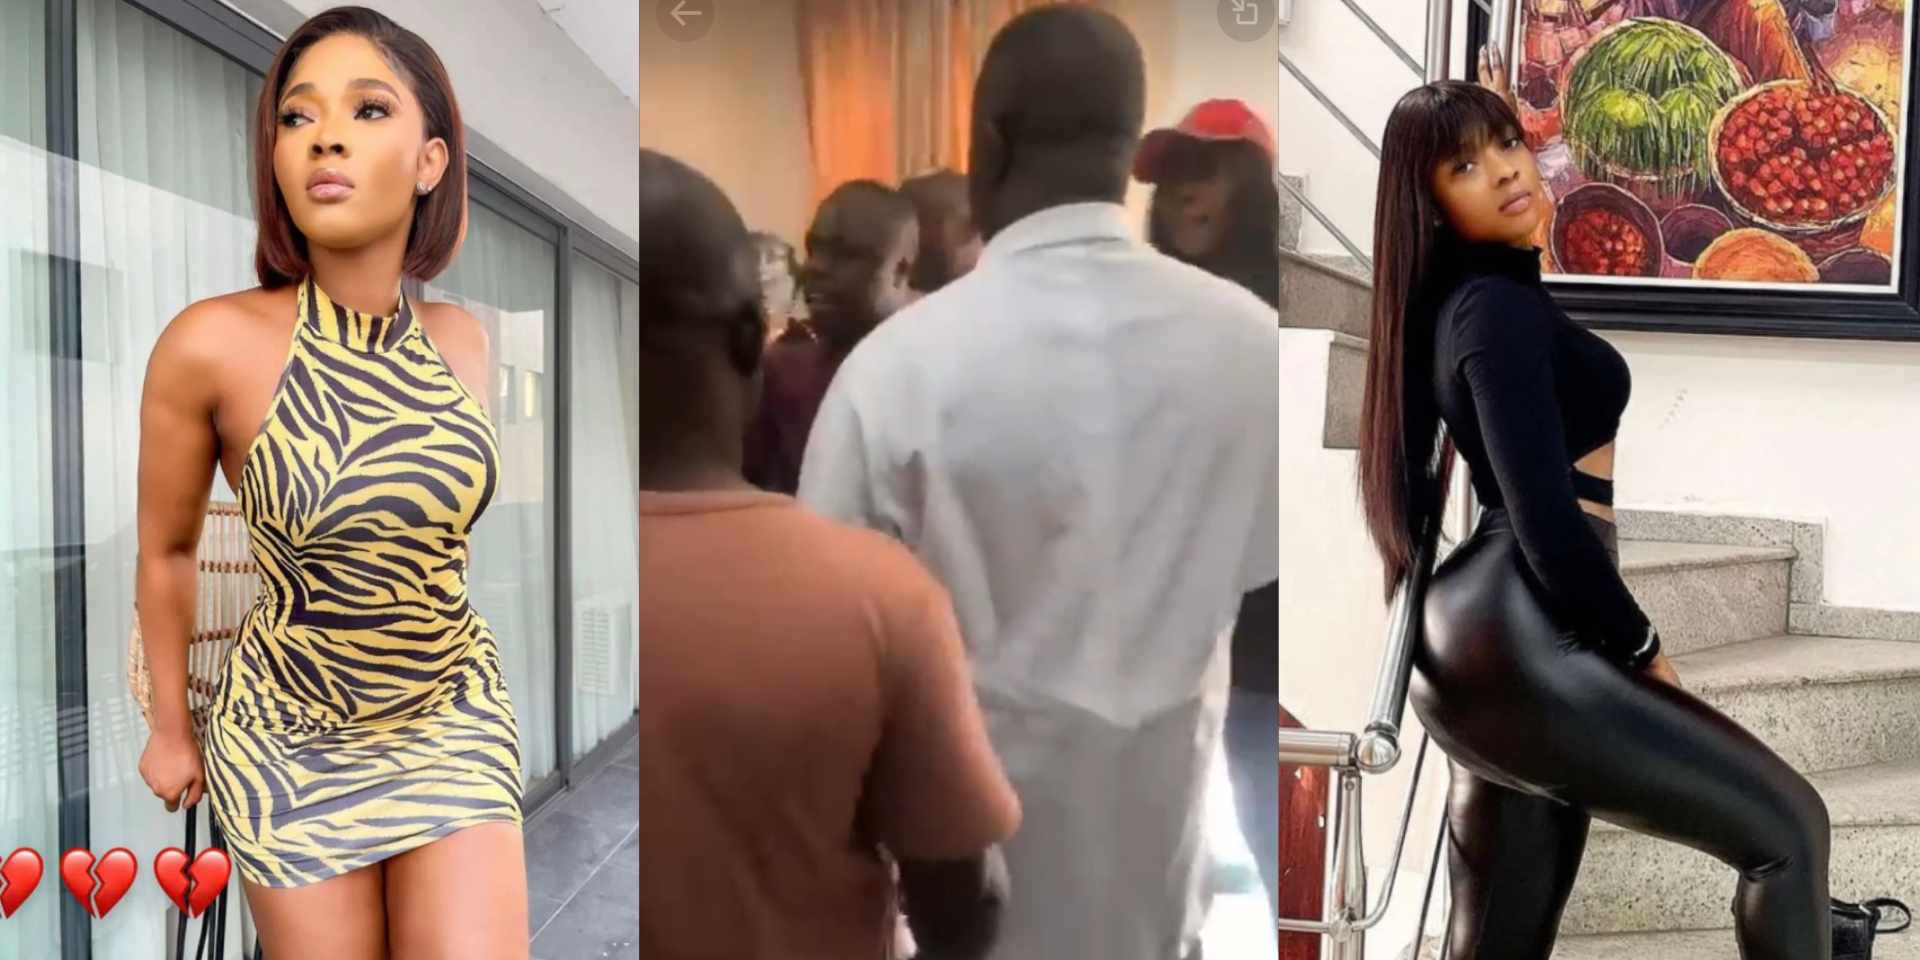 Friends, family confront doctor as lady dies after plastic surgery; police seek information [Videos]